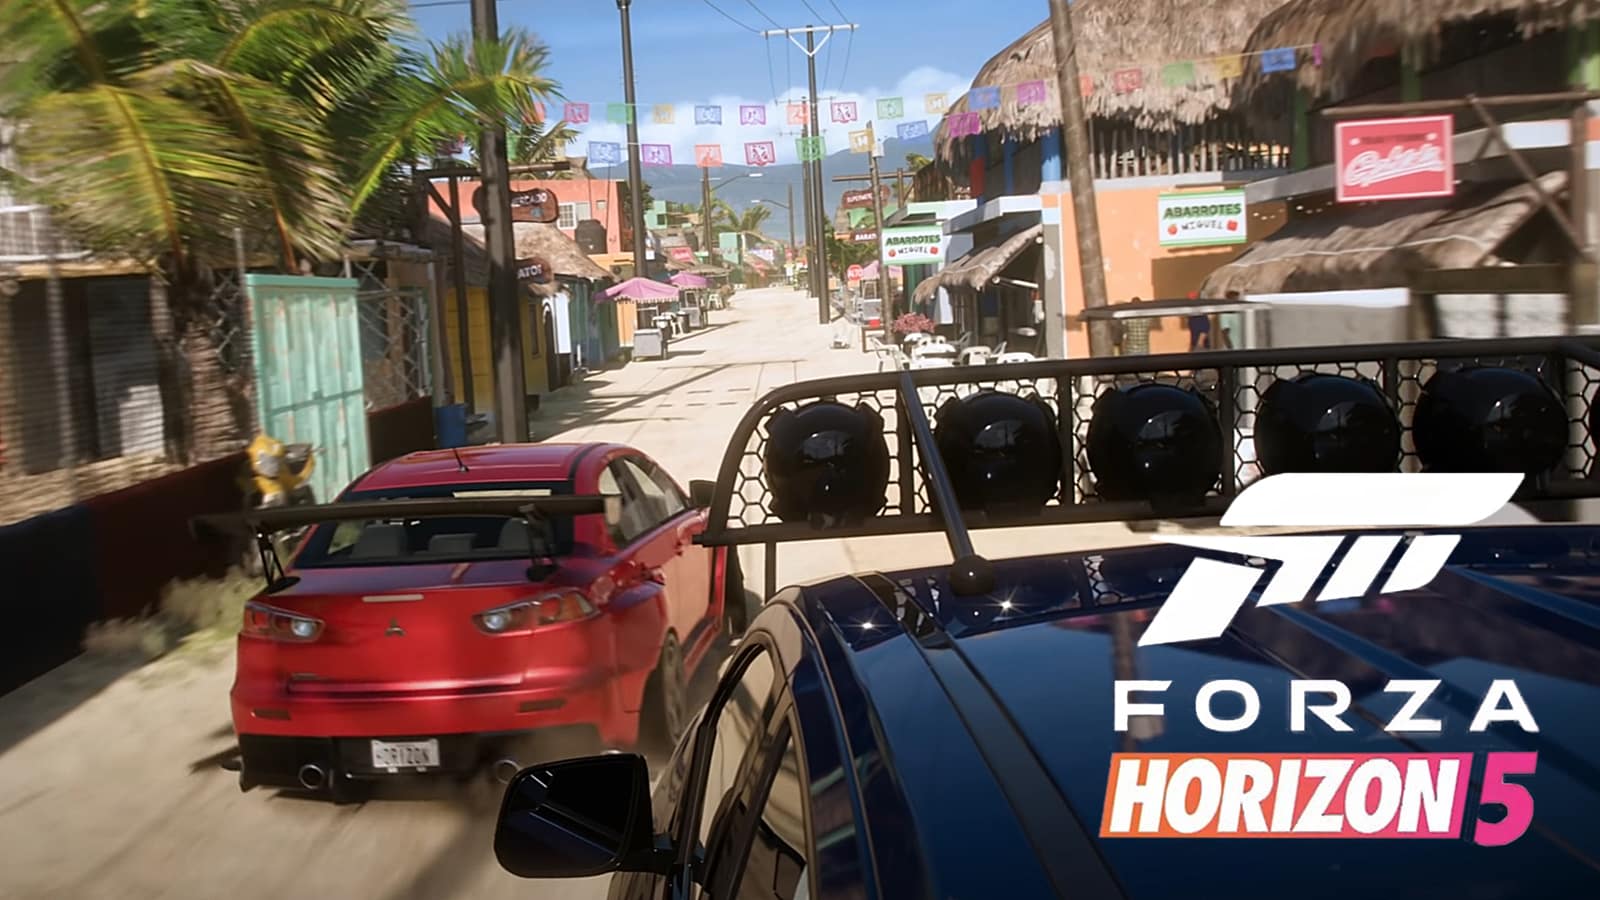 Two cars racing through the streets of Mexico in Forza Horizon 5